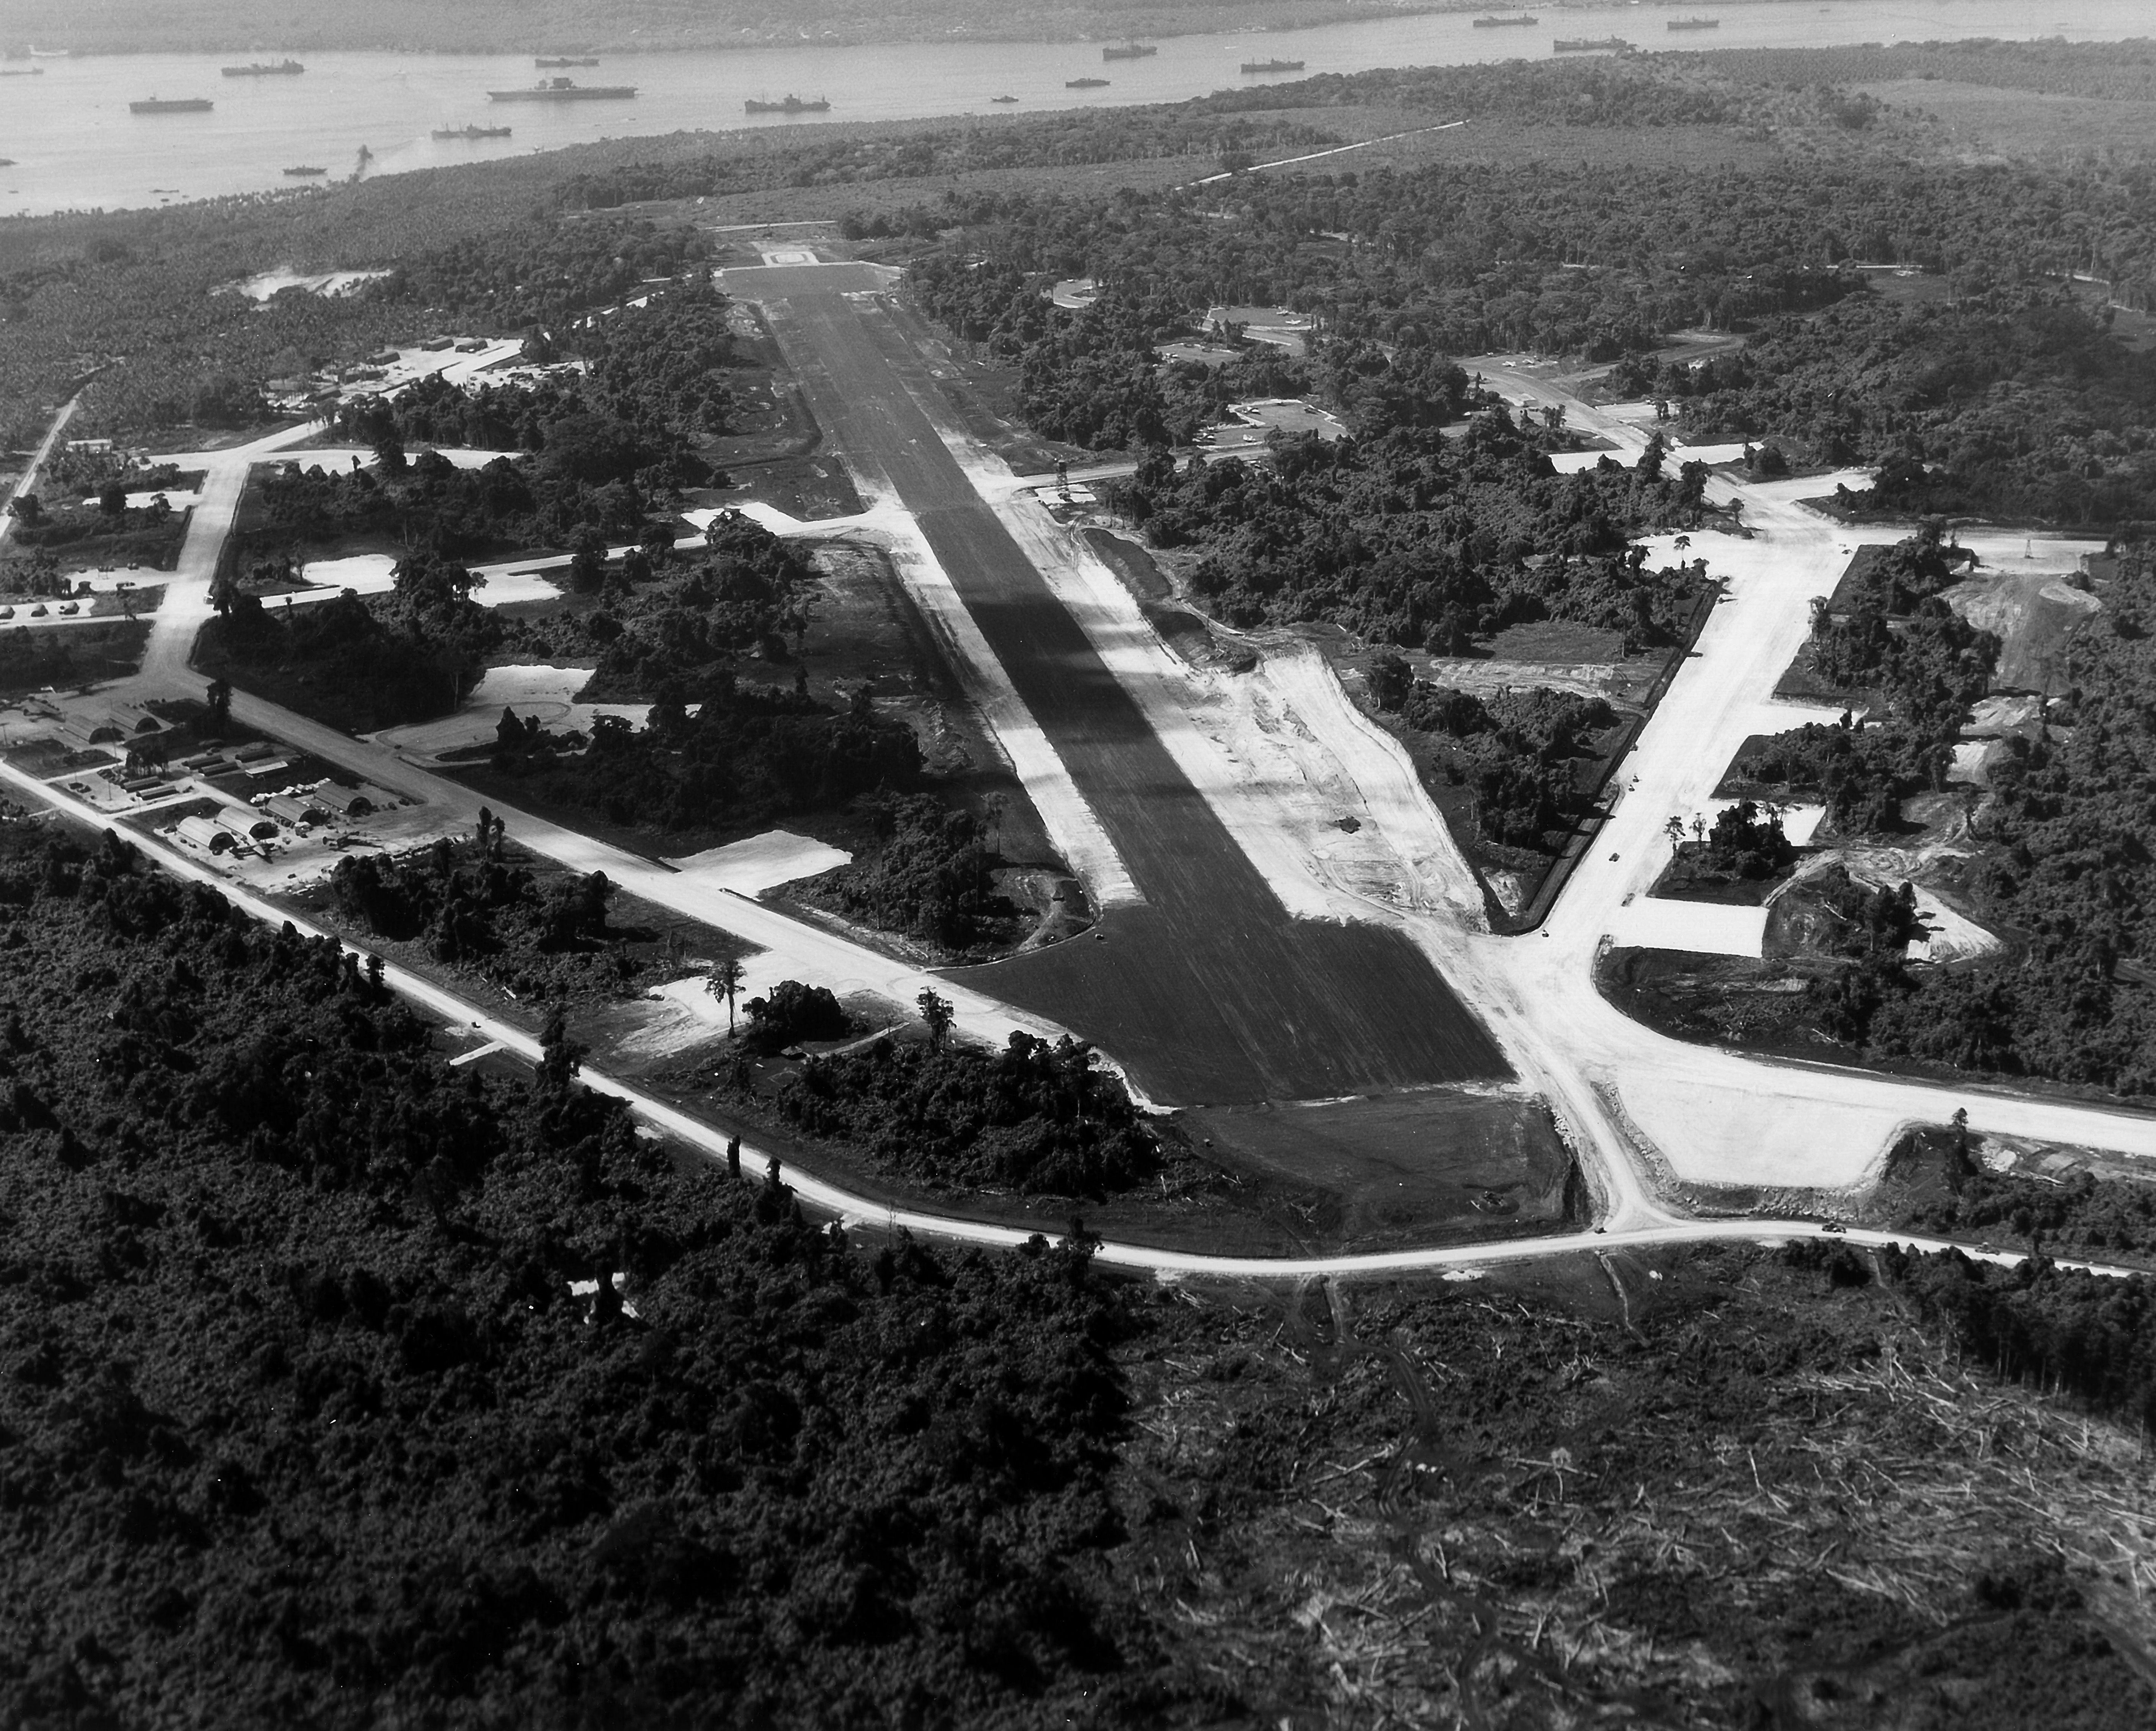 One of the three bomber airfields built at Base Button.